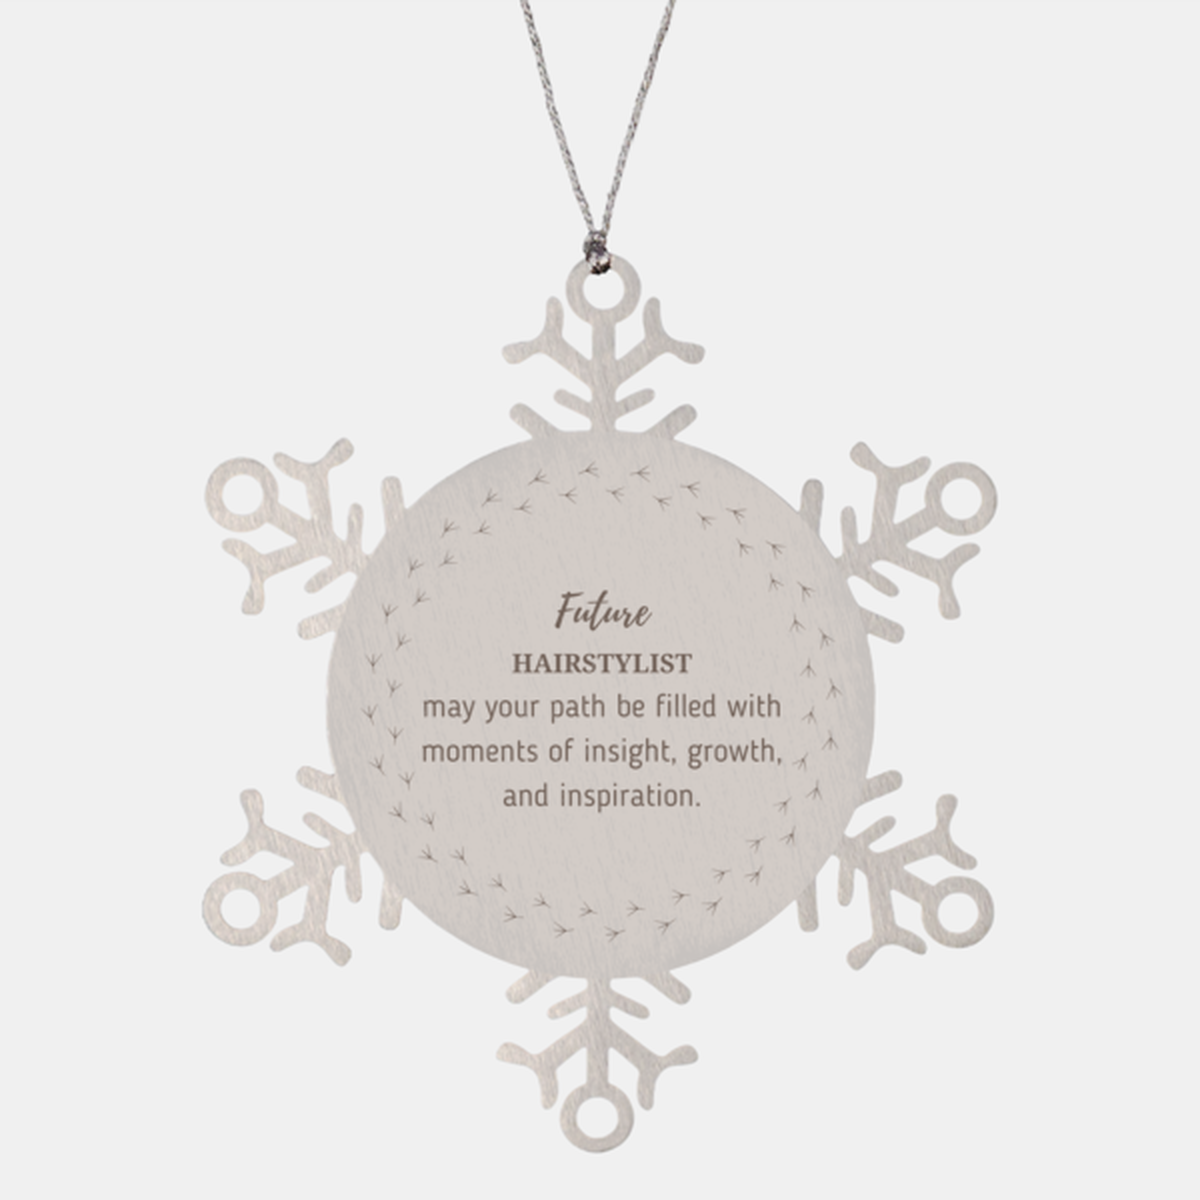 Future Hairstylist Gifts, May your path be filled with moments of insight, Graduation Gifts for New Hairstylist, Christmas Unique Snowflake Ornament For Men, Women, Friends